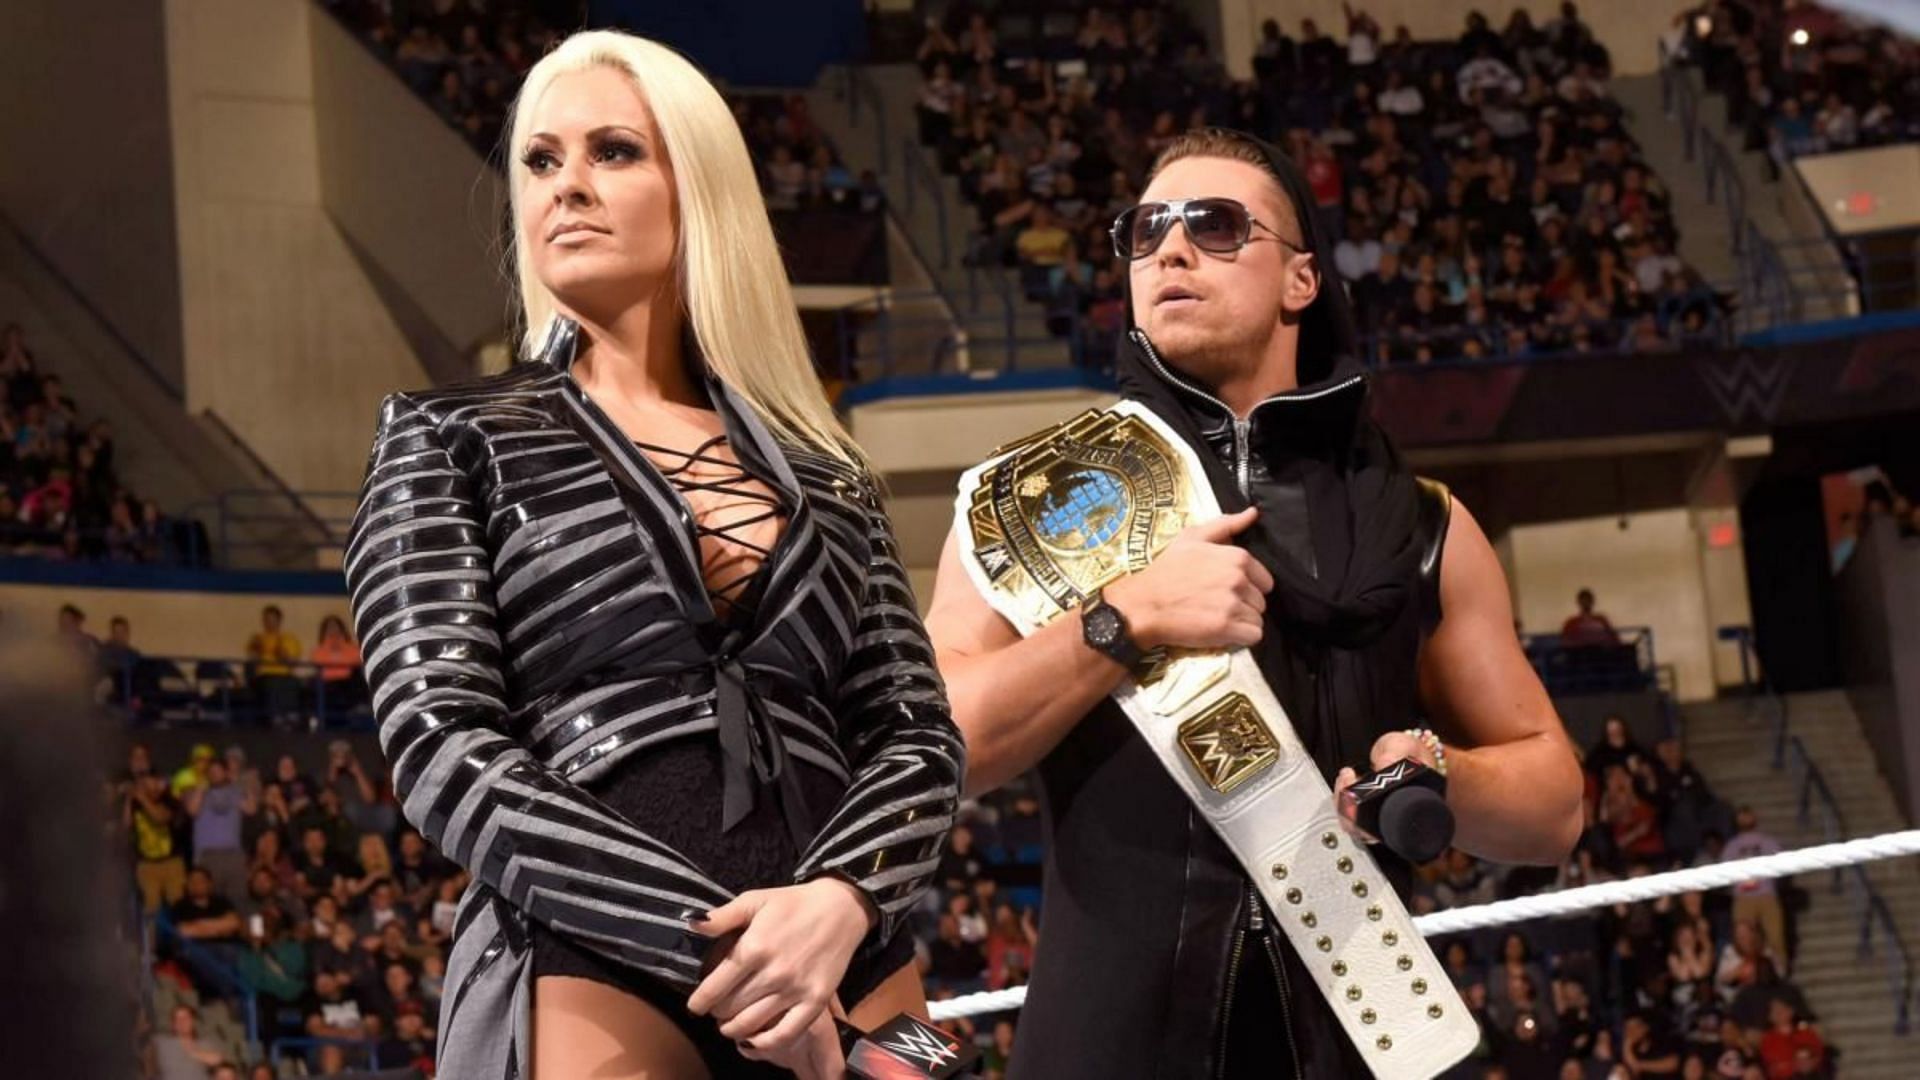 The Miz and Maryse are now married